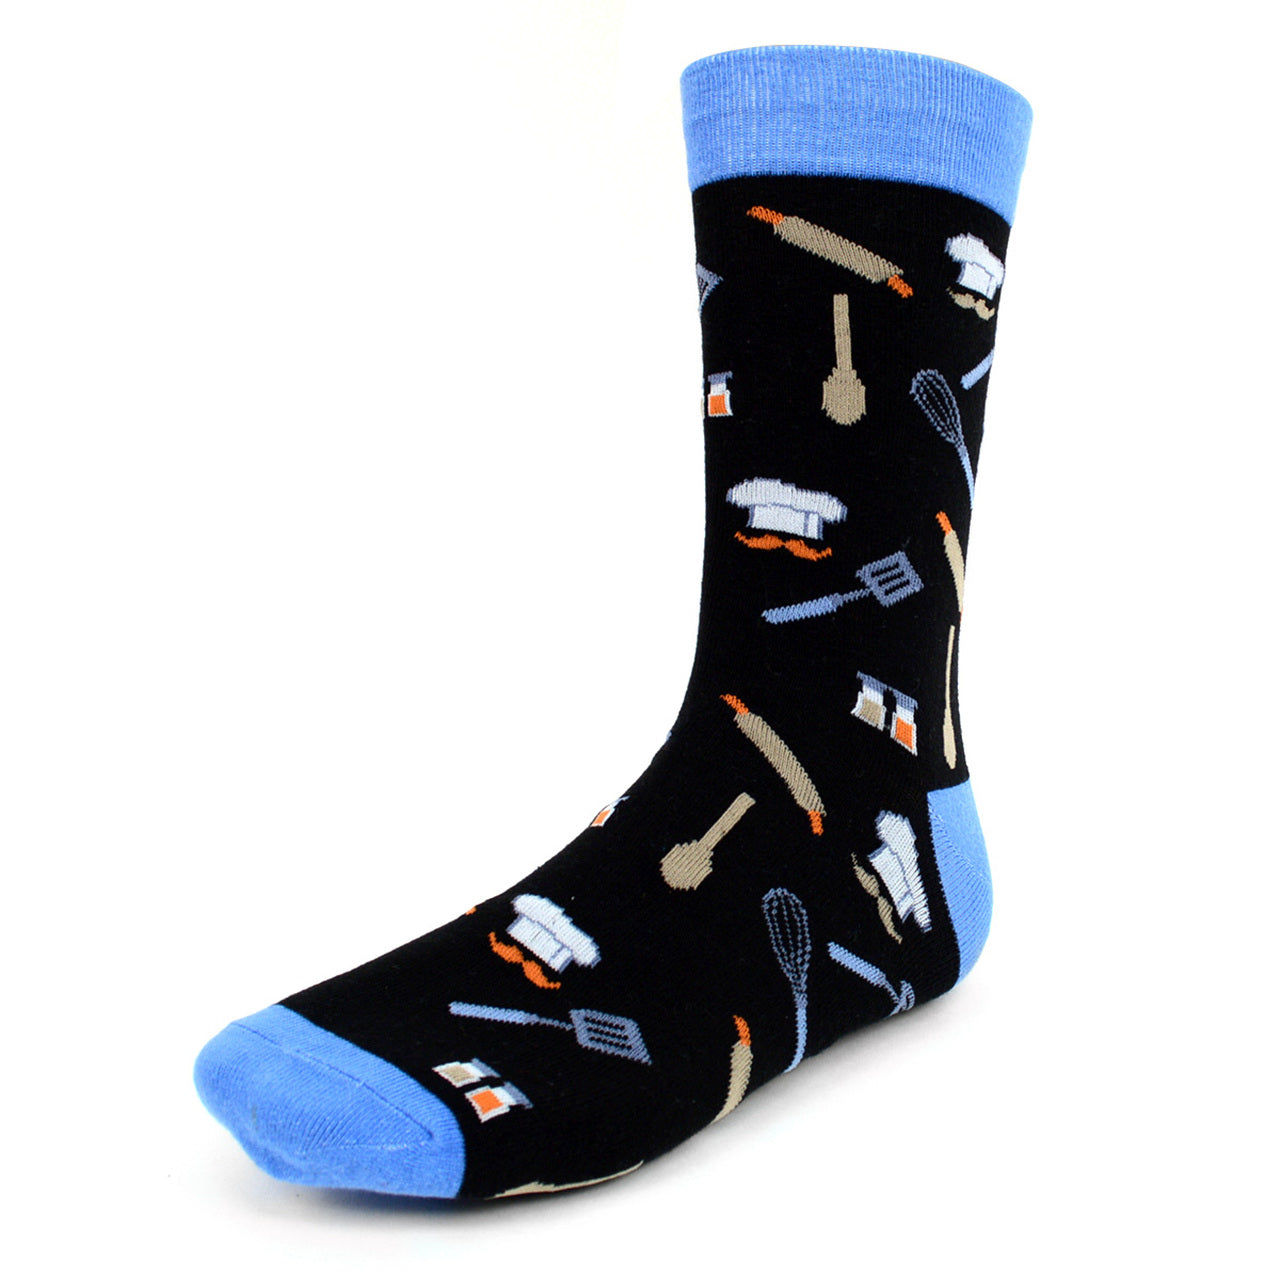 Fun Socks Men's Cook Chef Novelty Socks Black and Blue Cooking Lovers Restaurant Owner Gifts